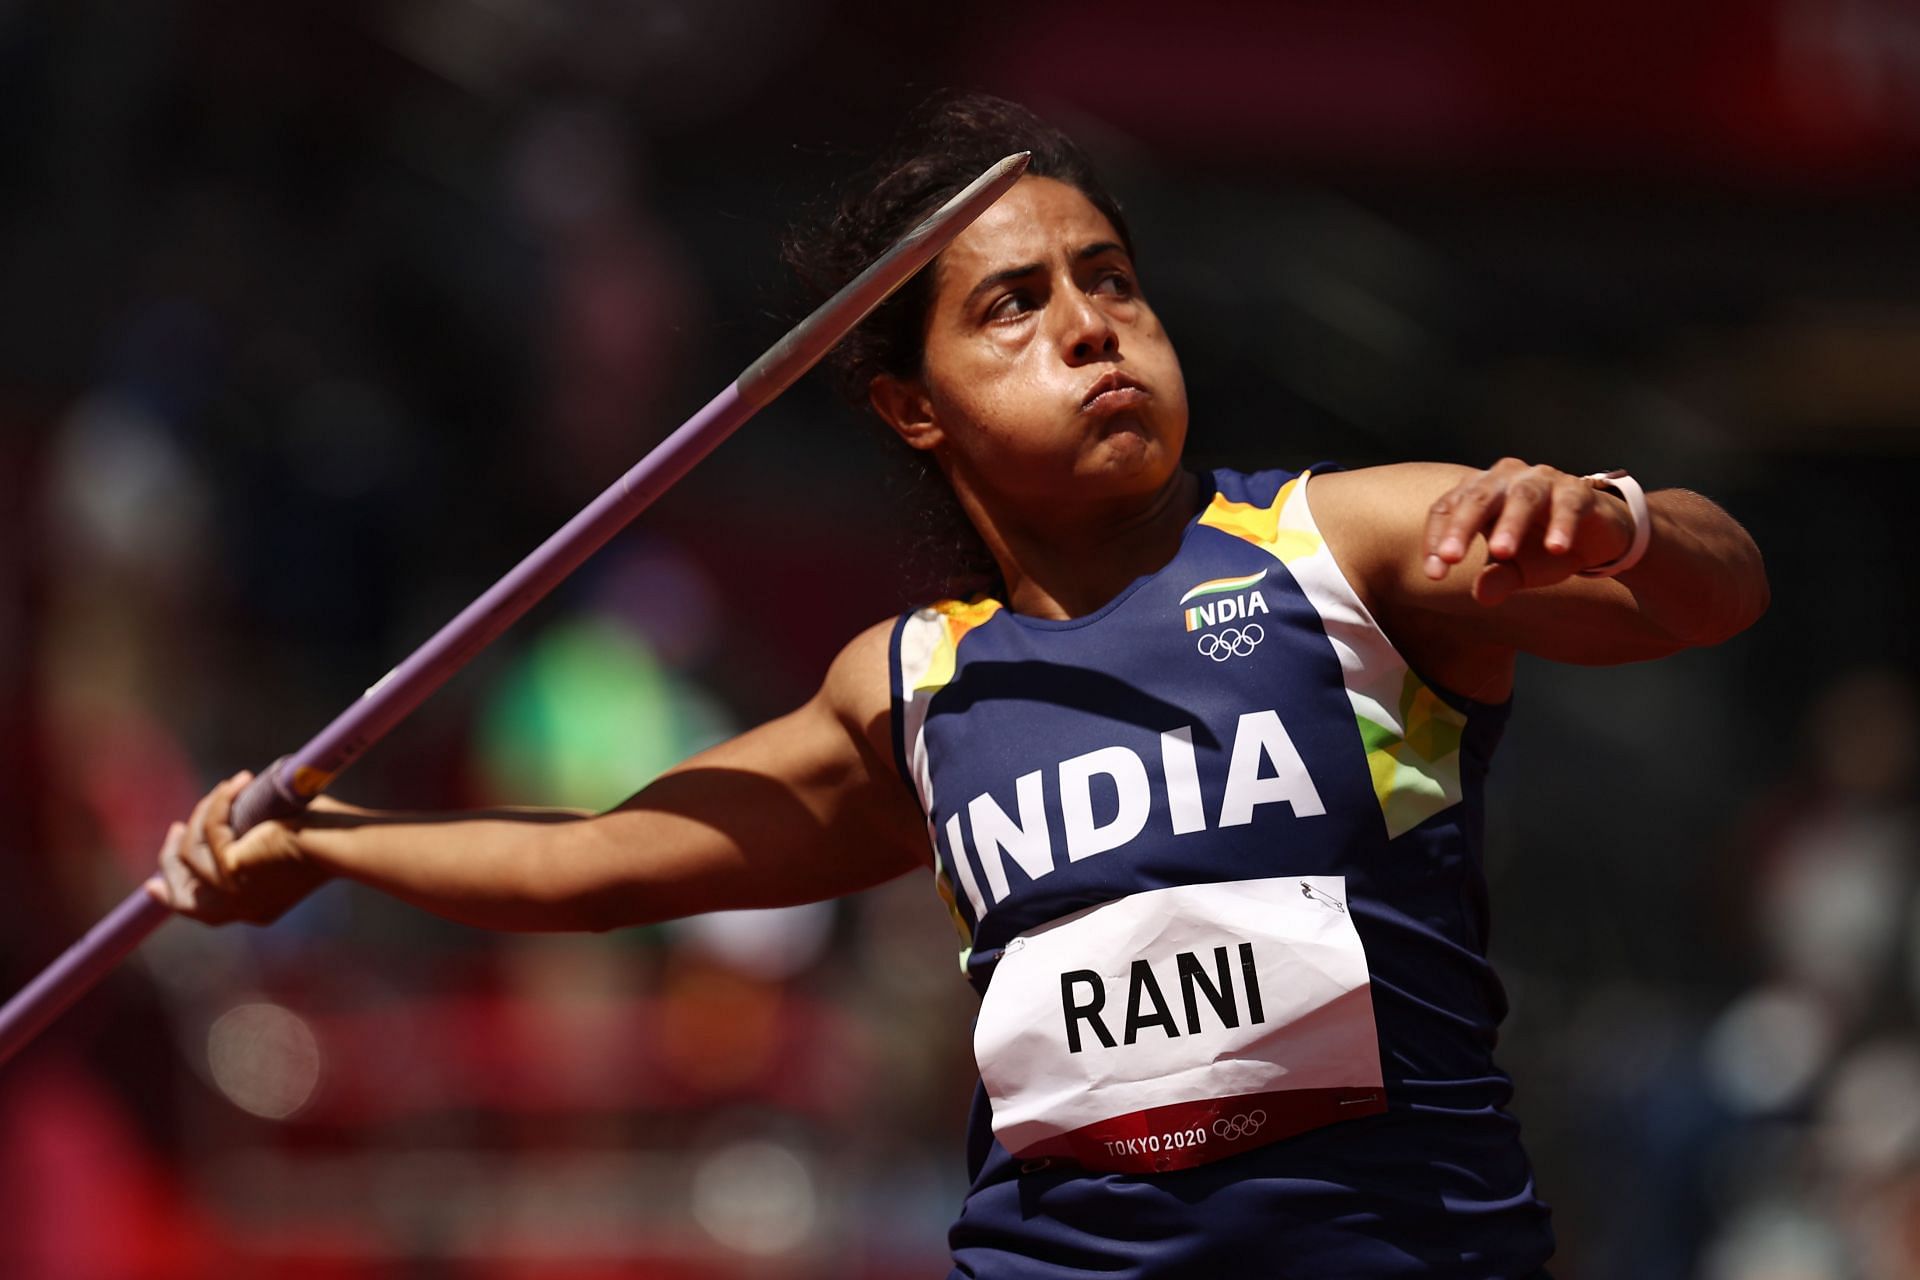 Annu Rani will be in action in Eugene (File photo)